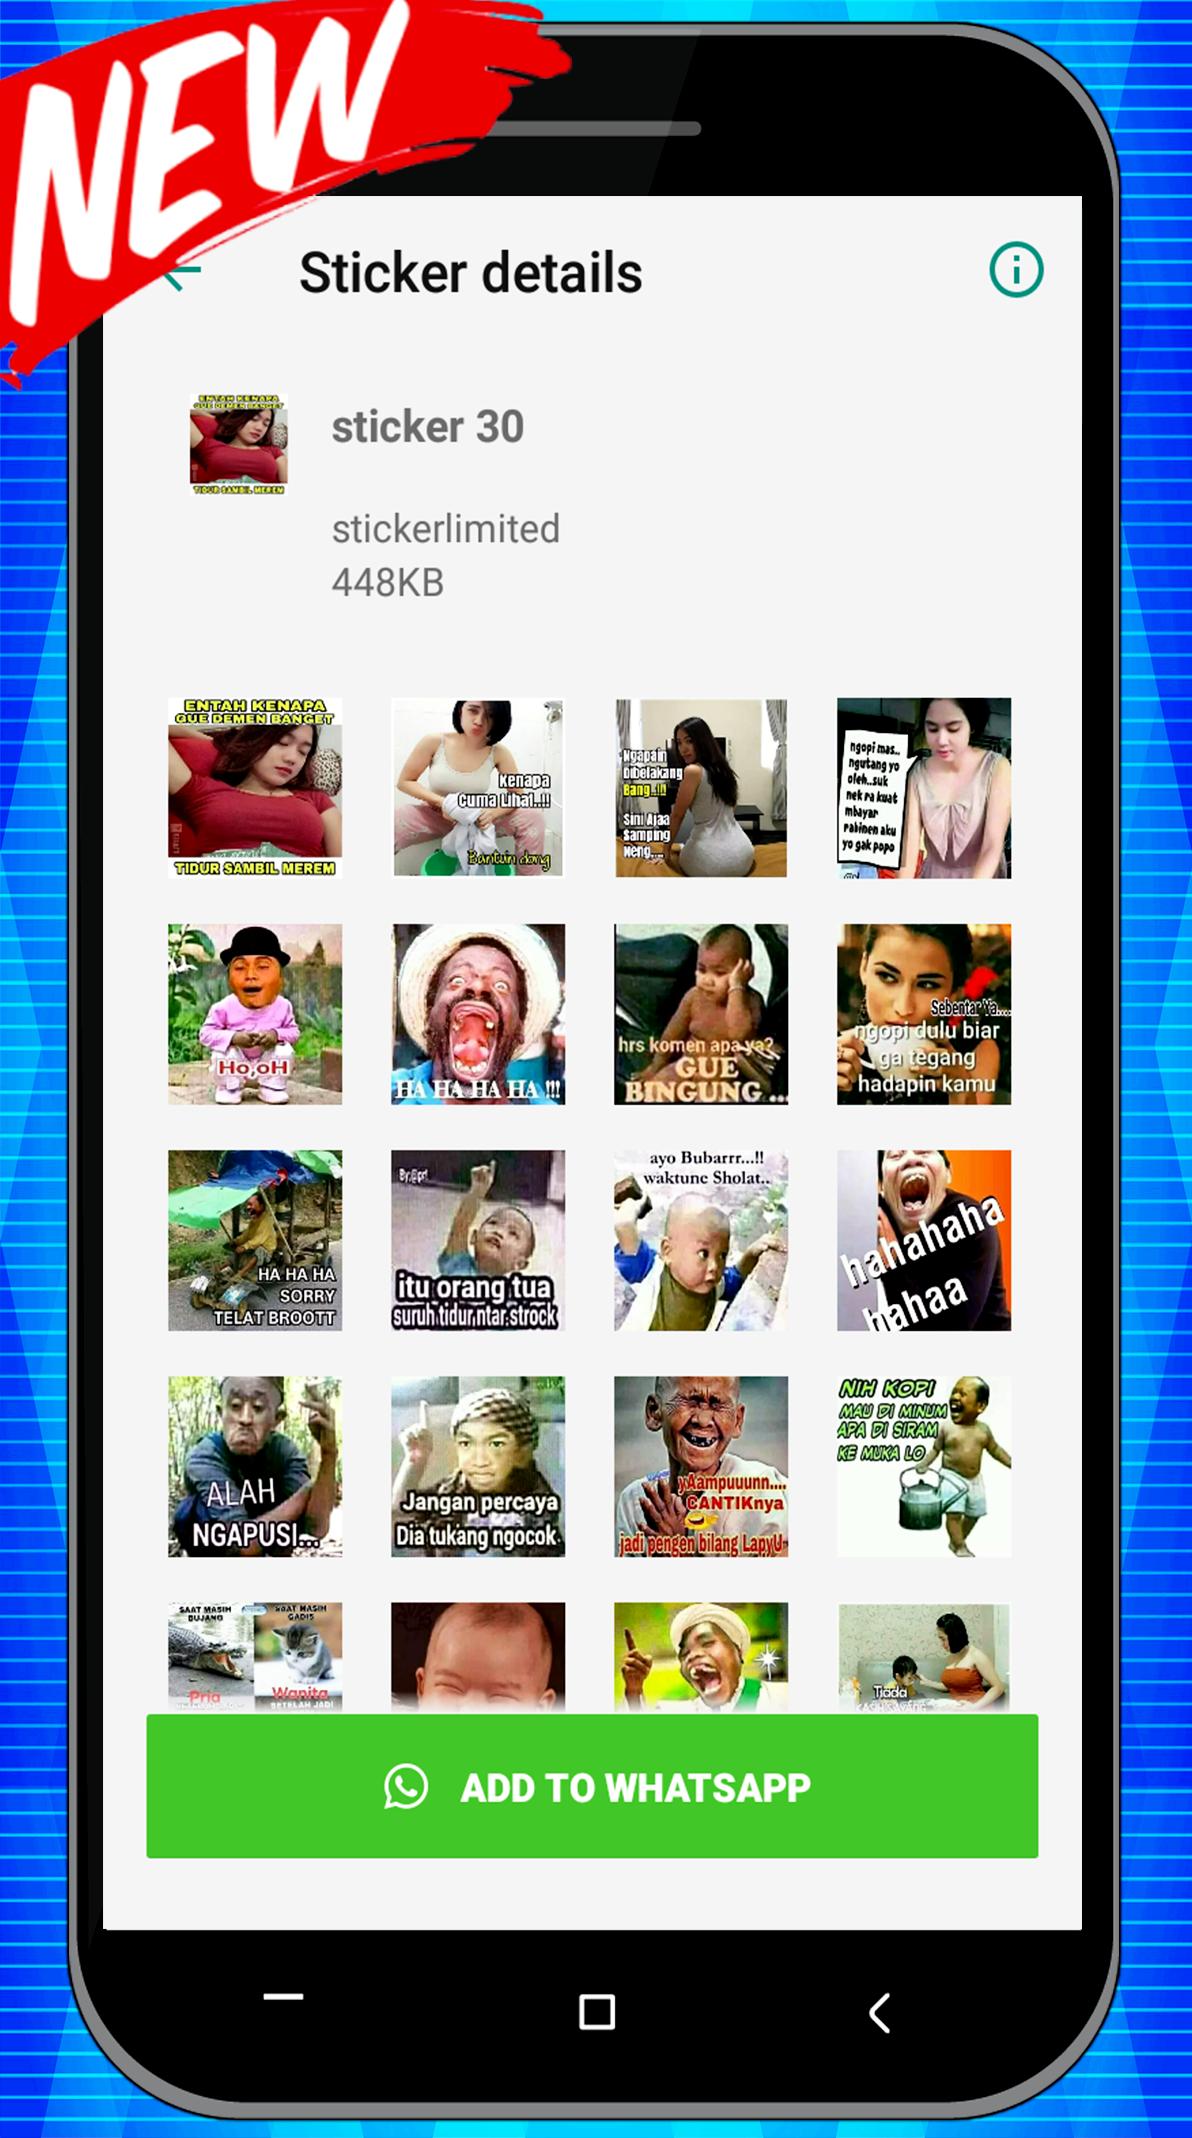 Perang Sticker Fb Lucu For Wastickerapps For Android Apk Download